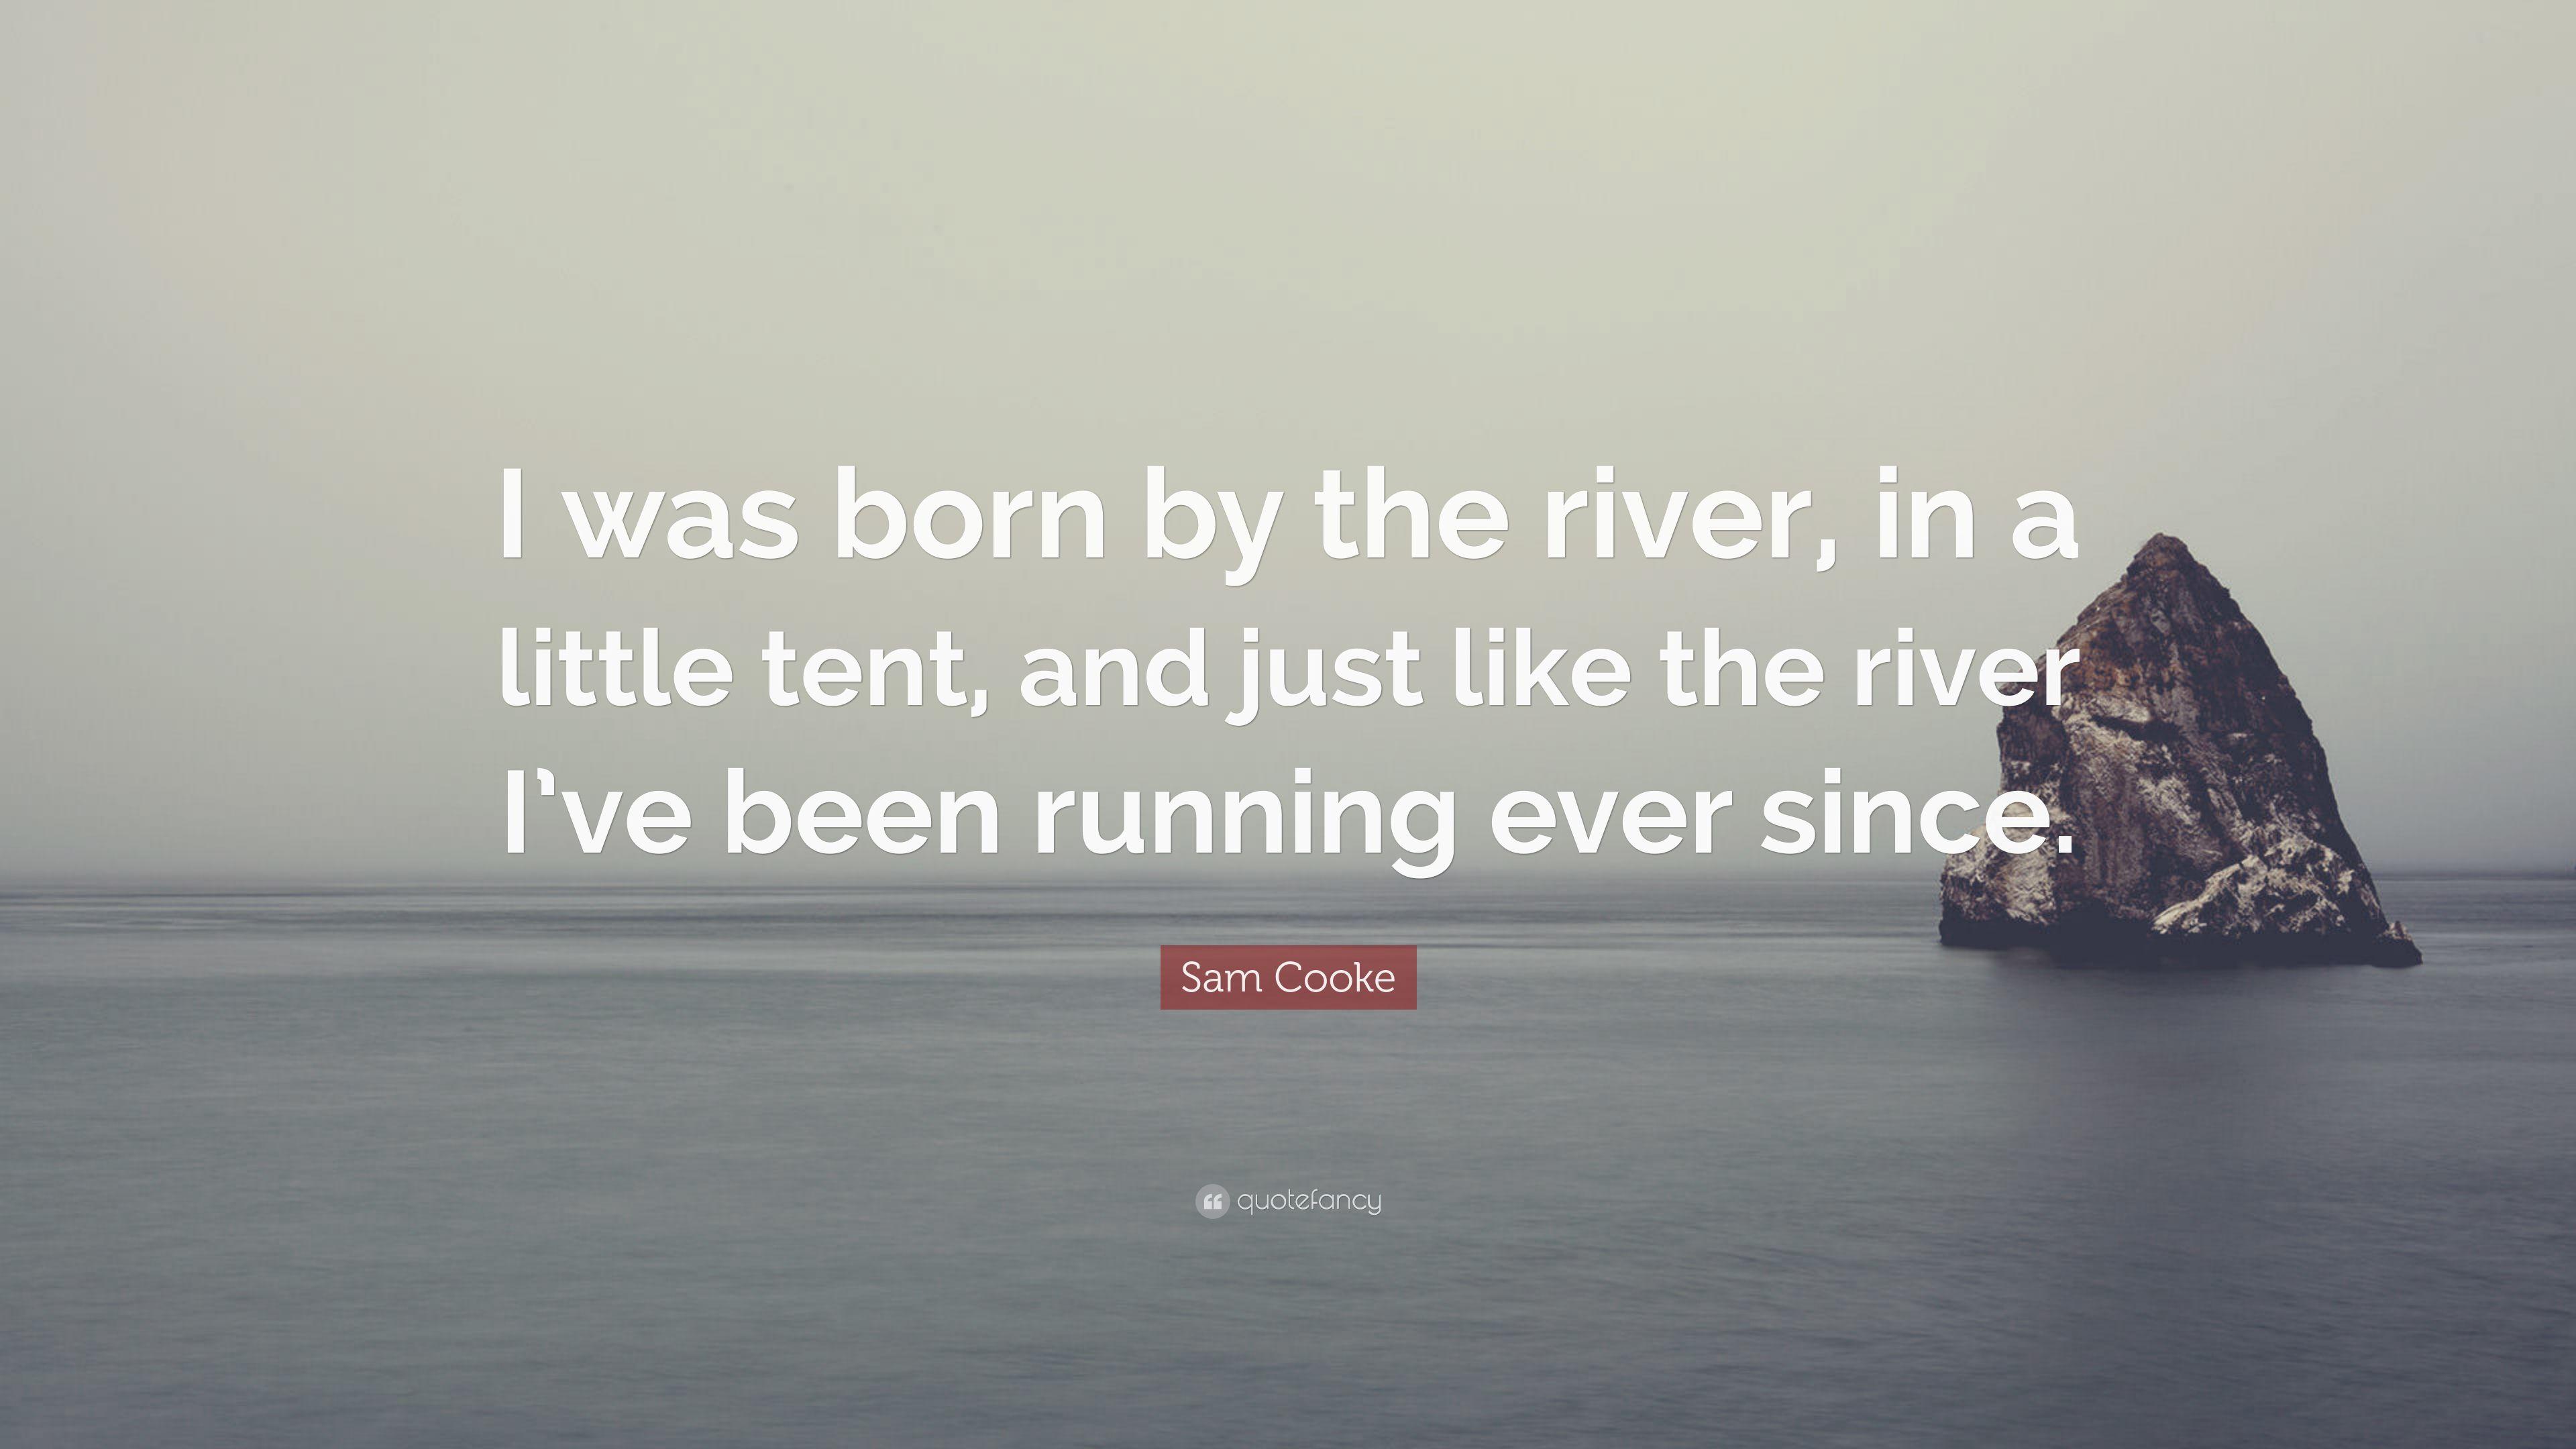 Sam Cooke Quote: “I was born by the river, in a little tent